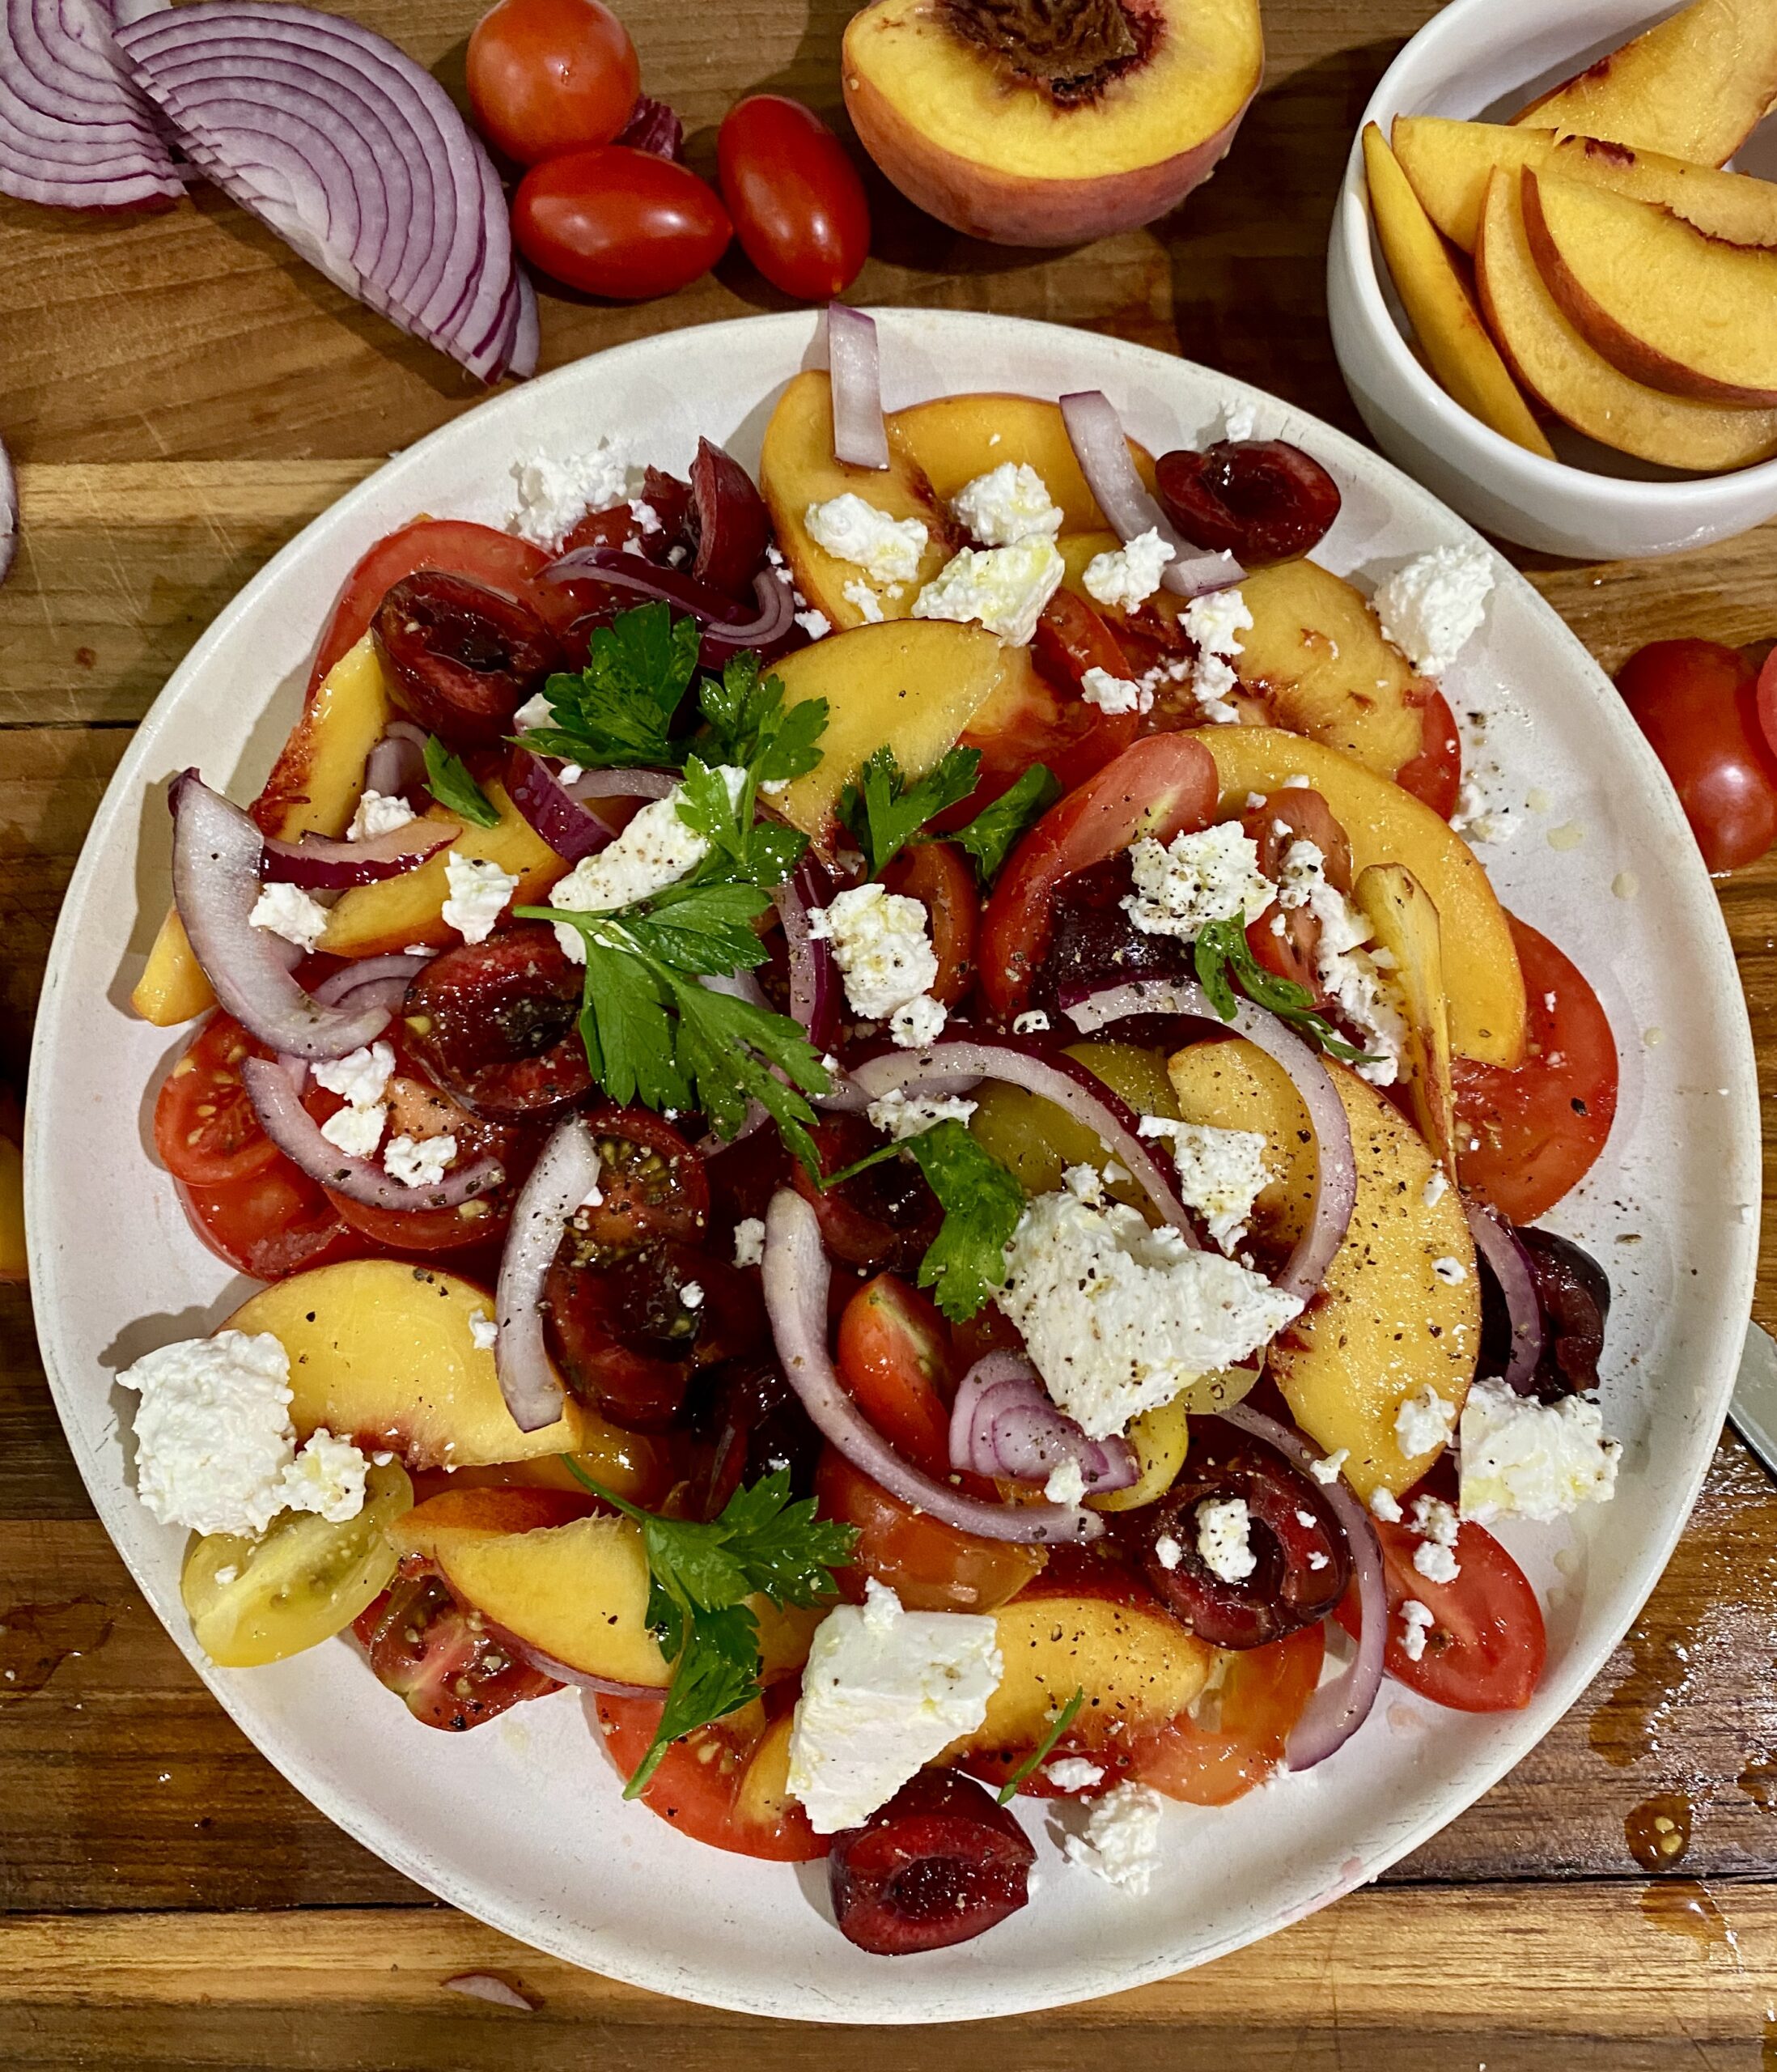 A white plate topped with salad and fruit.